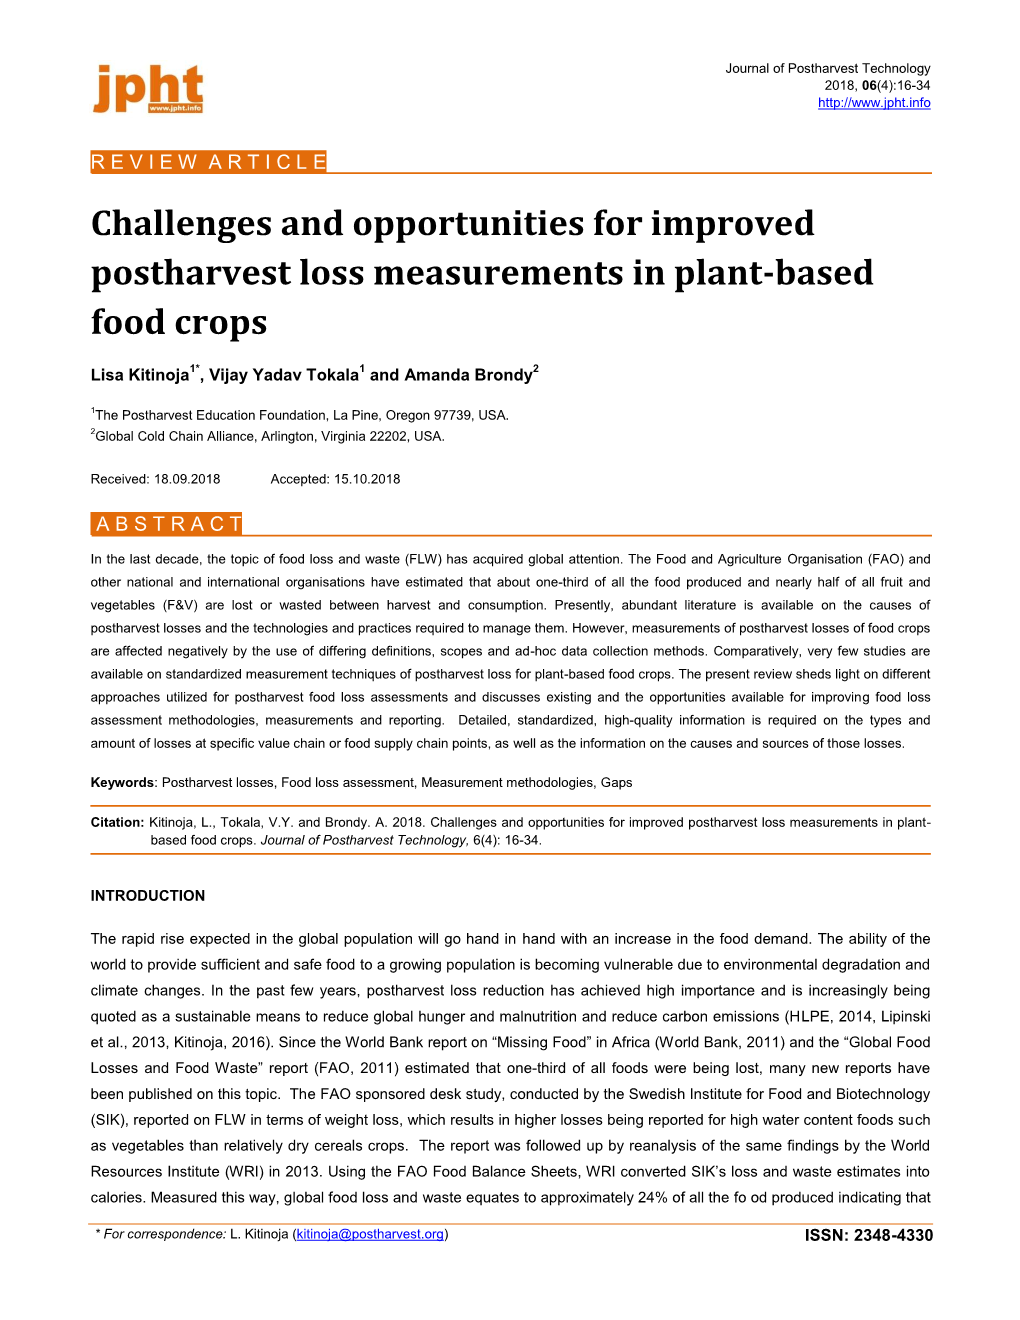 Challenges and Opportunities for Improved Postharvest Loss Measurements in Plant-Based Food Crops